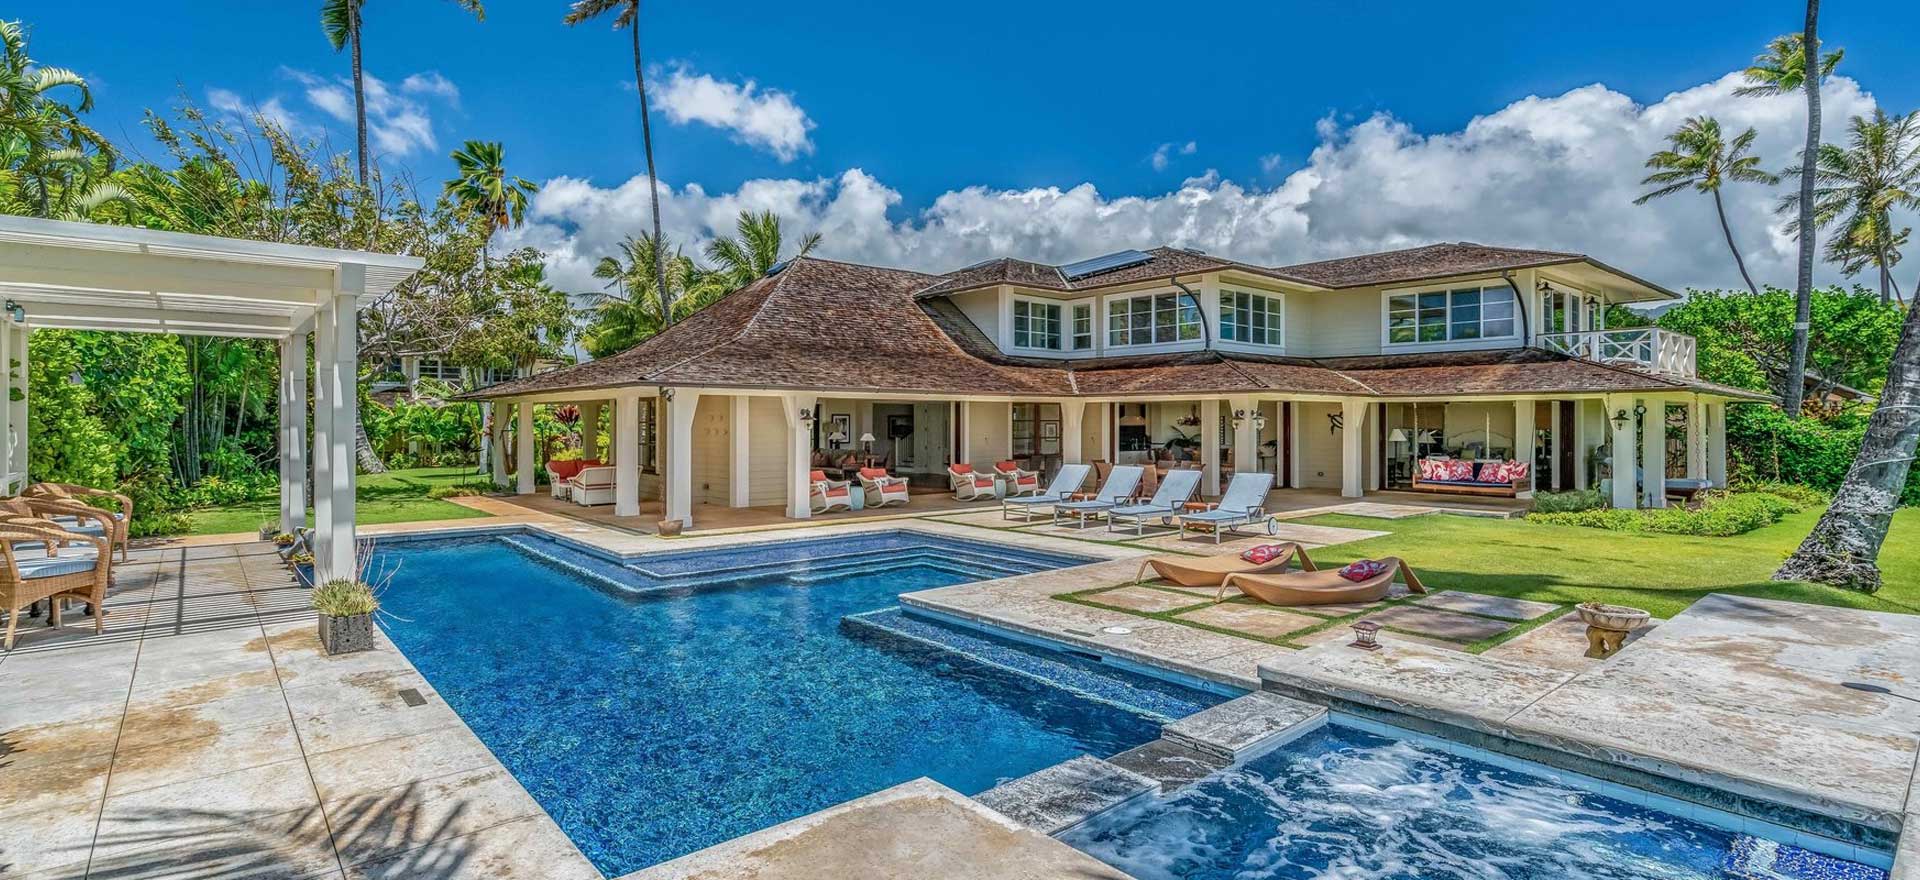 An image of the pool and back of the Coral Reef villa for rent